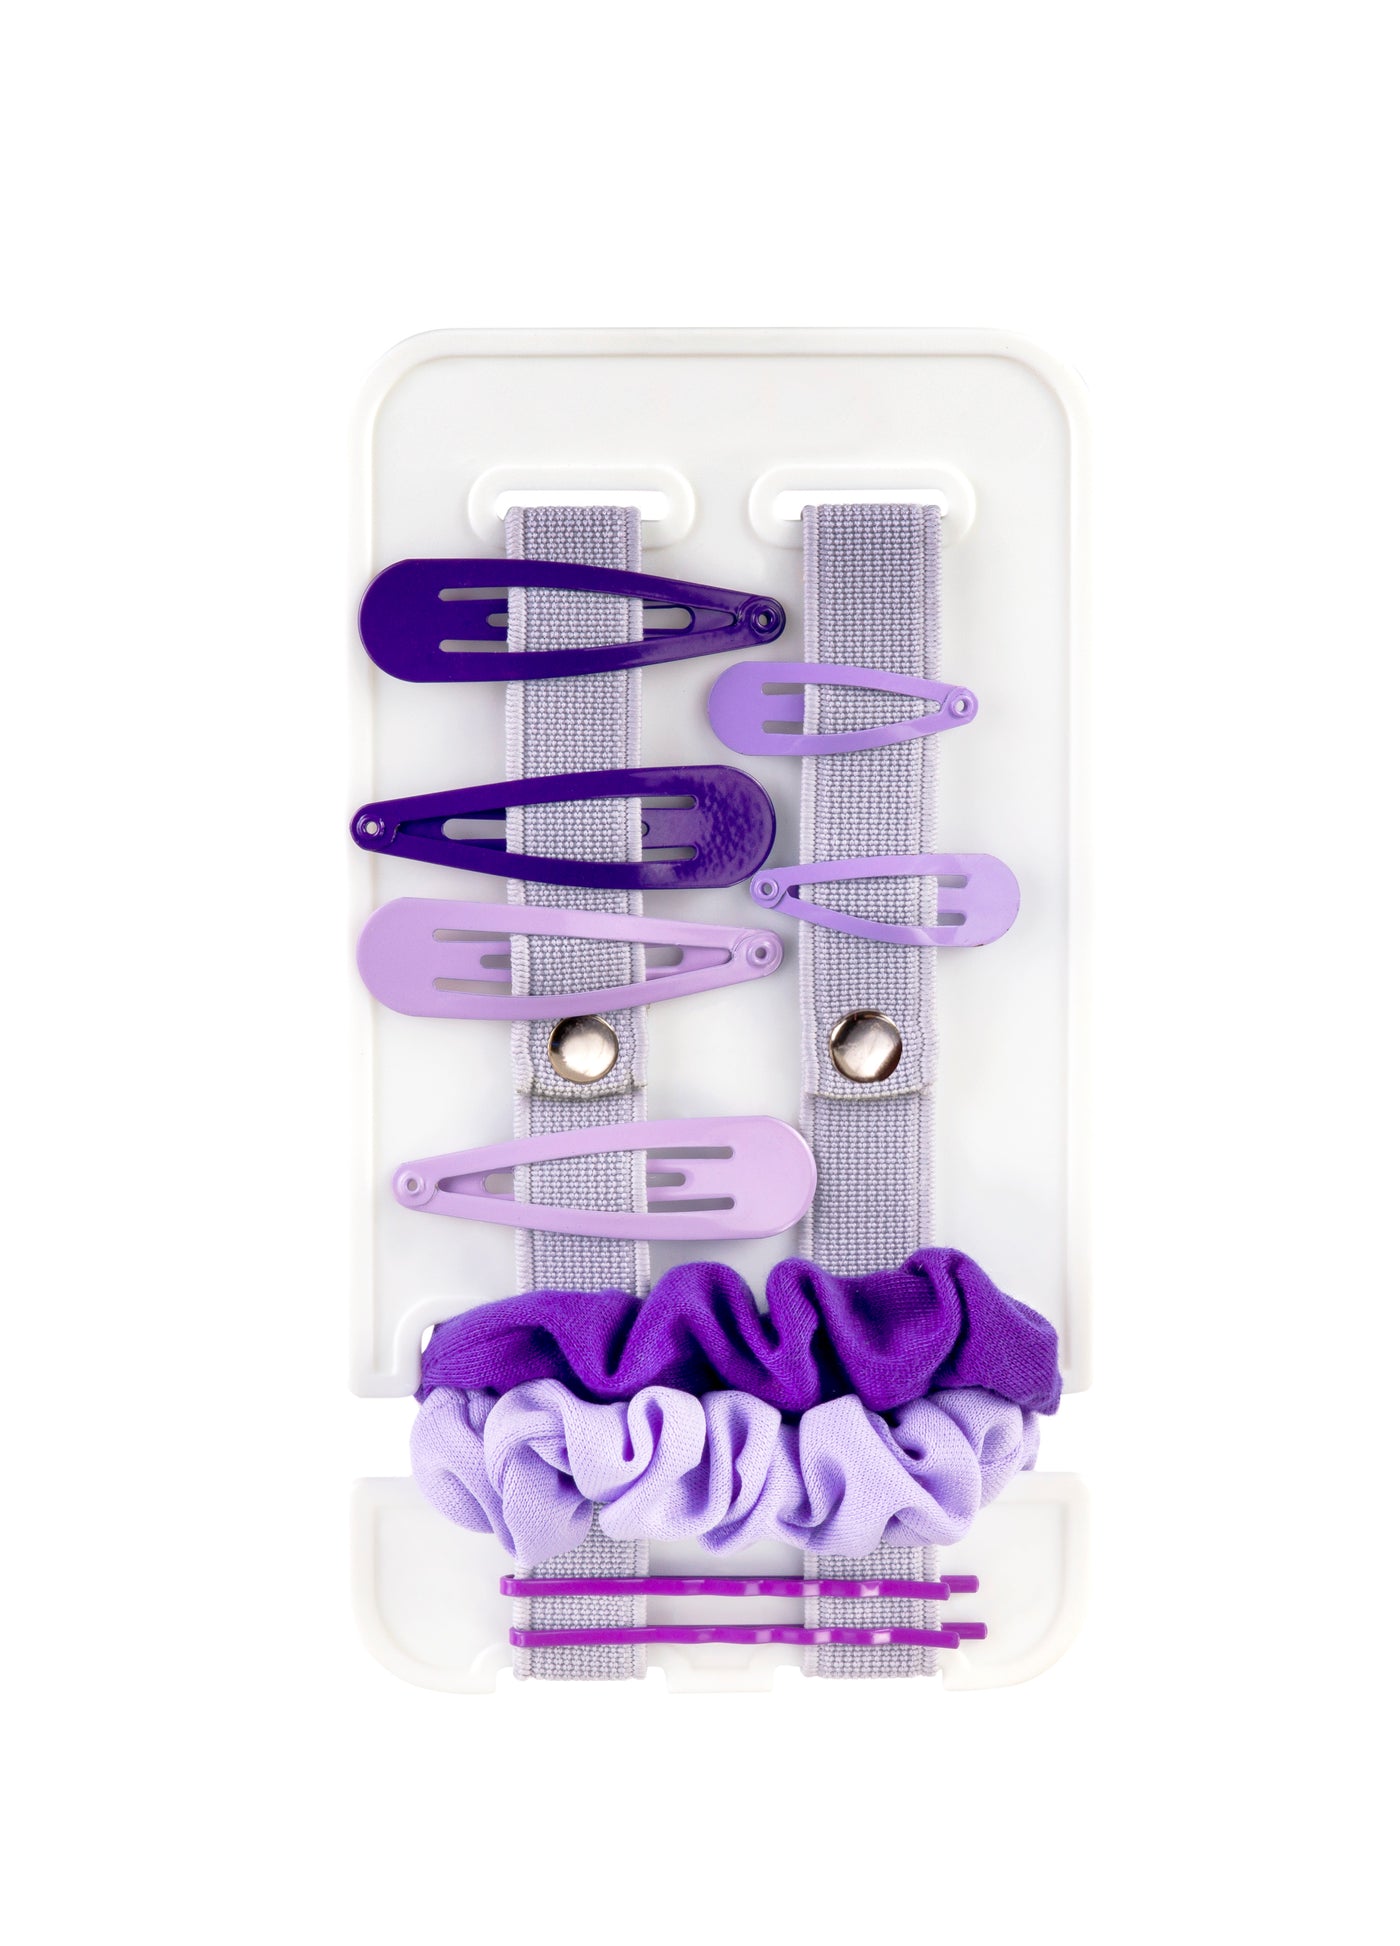 Purple clips and scrunchies on the back of the Mini Klipster hair accessories organizer